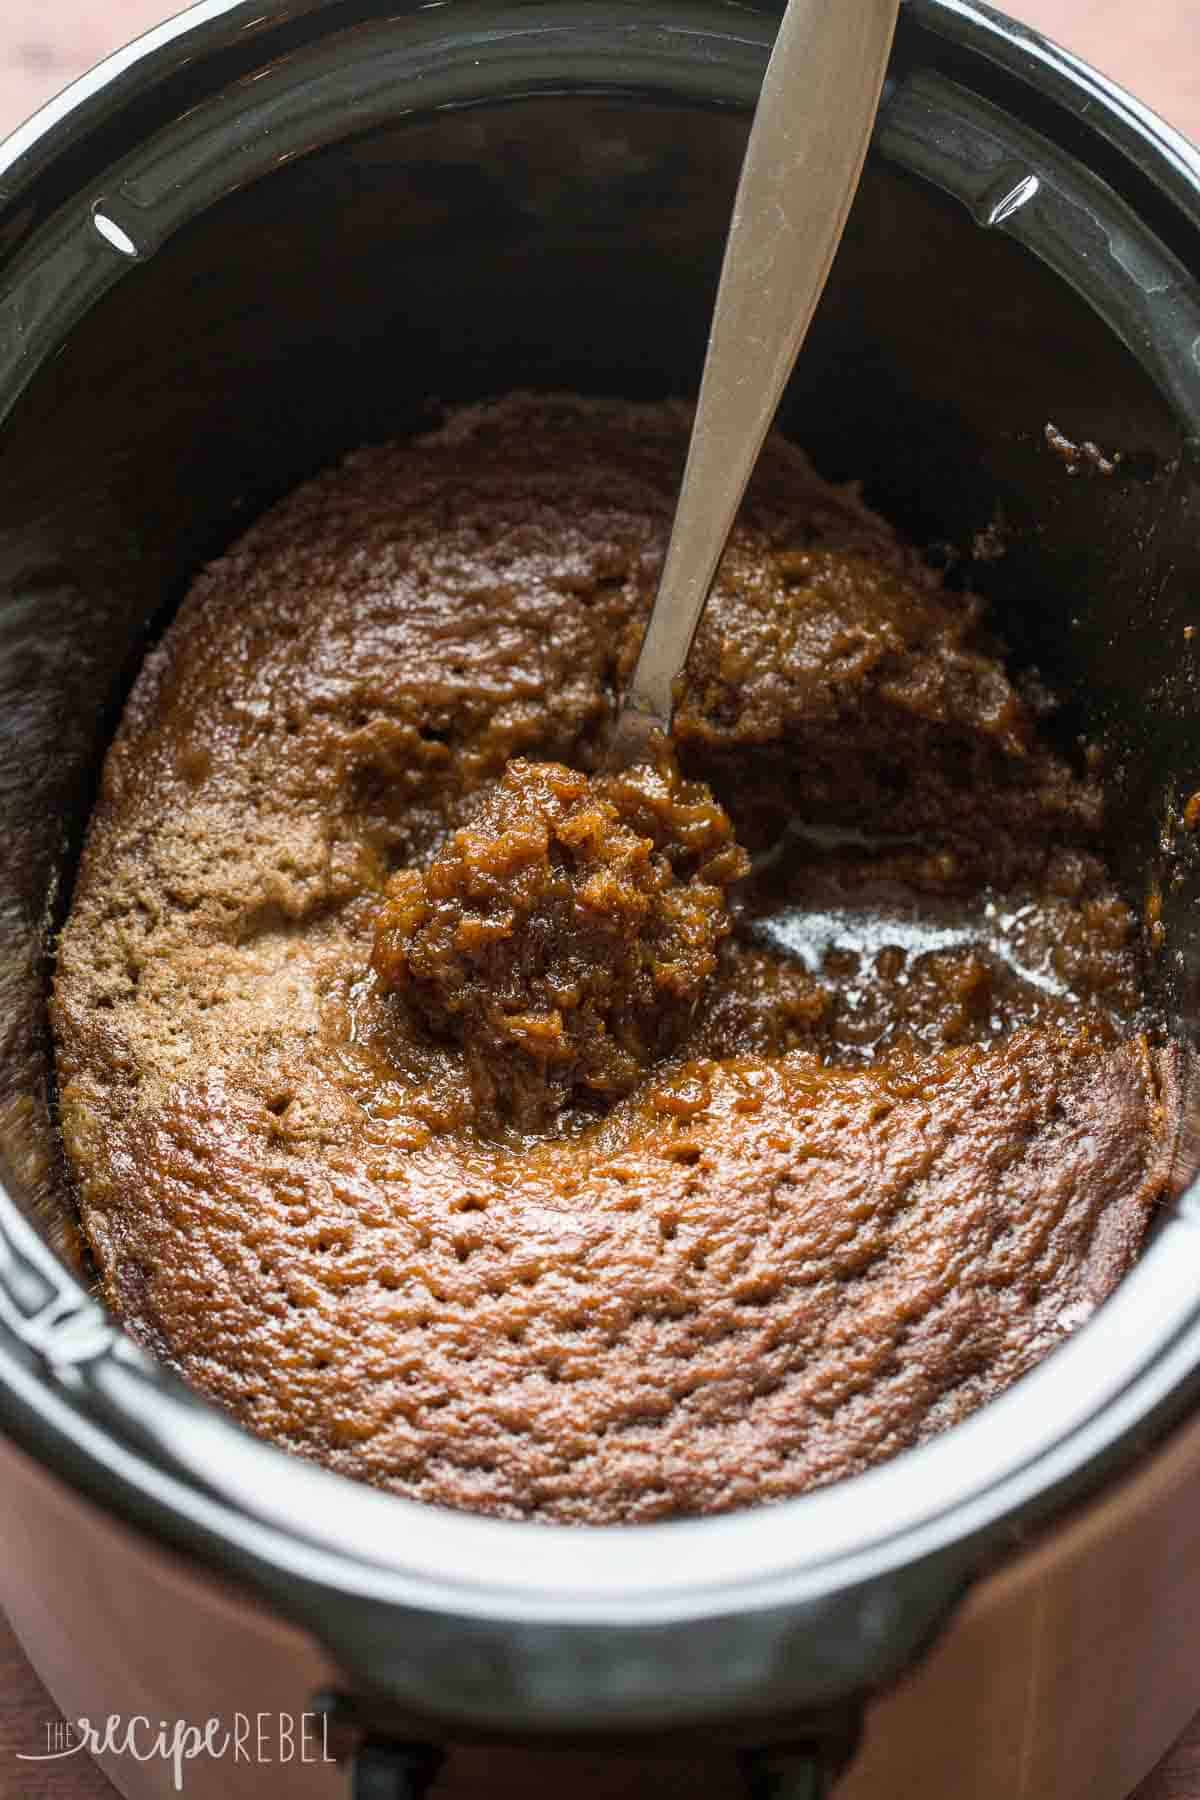 black slow cooker with gingerbread pudding cake in it and a metal spoon scooping some